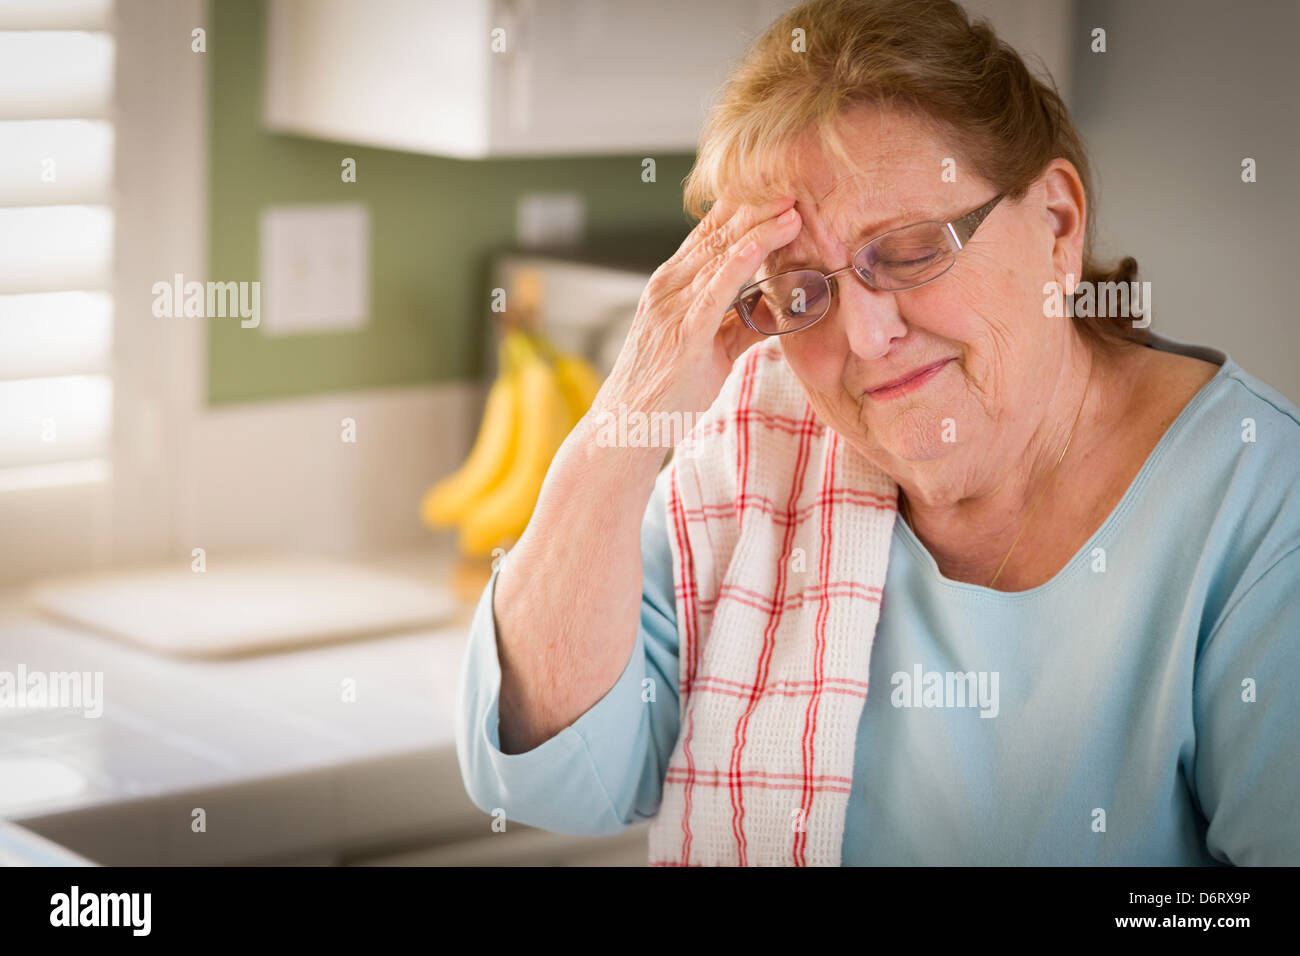 Sad Crying Senior Adult Woman At Kitchen Sink in Home. Stock Photo